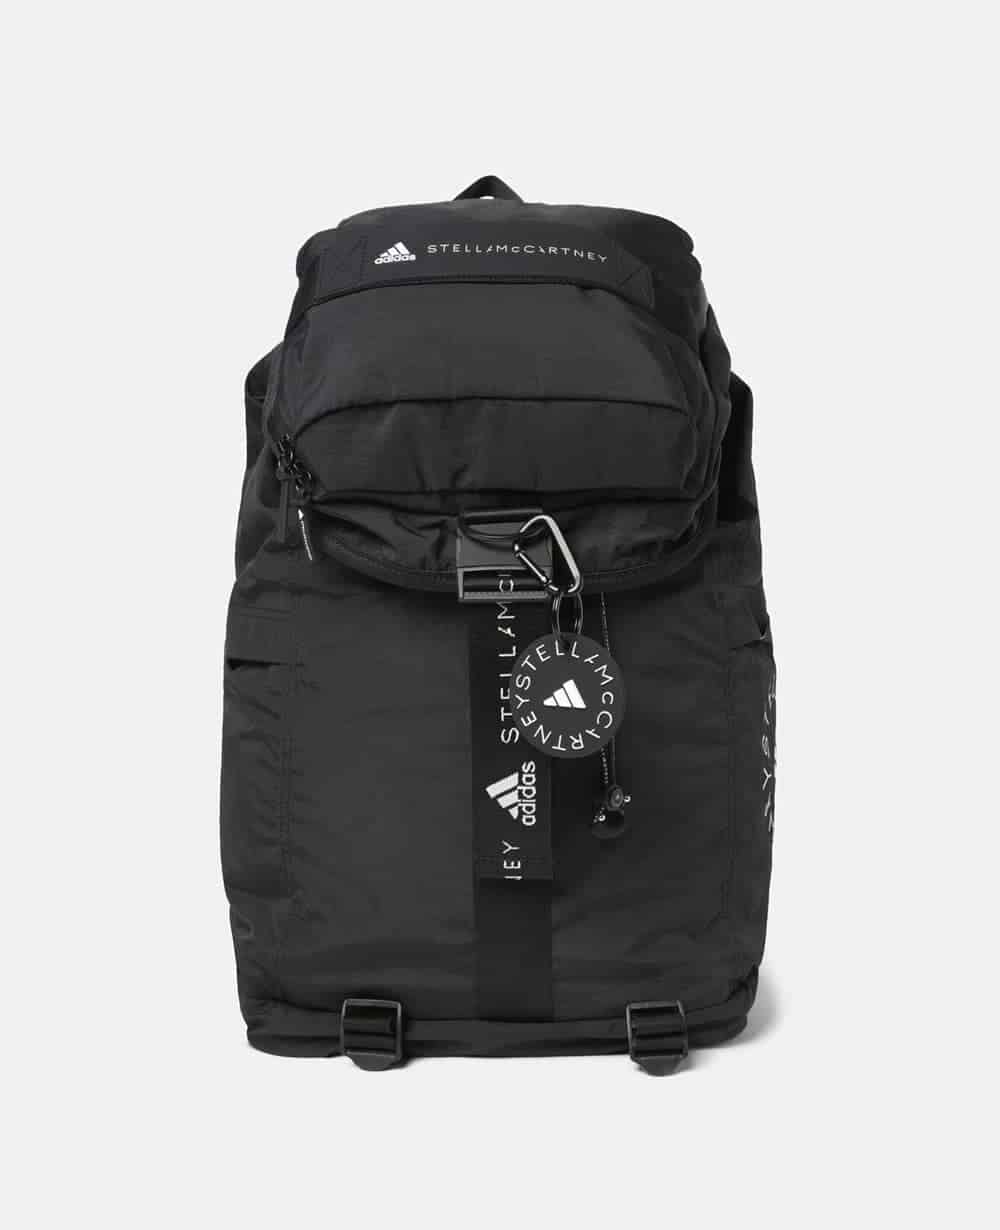 Black backpack featuring logos from Stella McCartney/Adidas